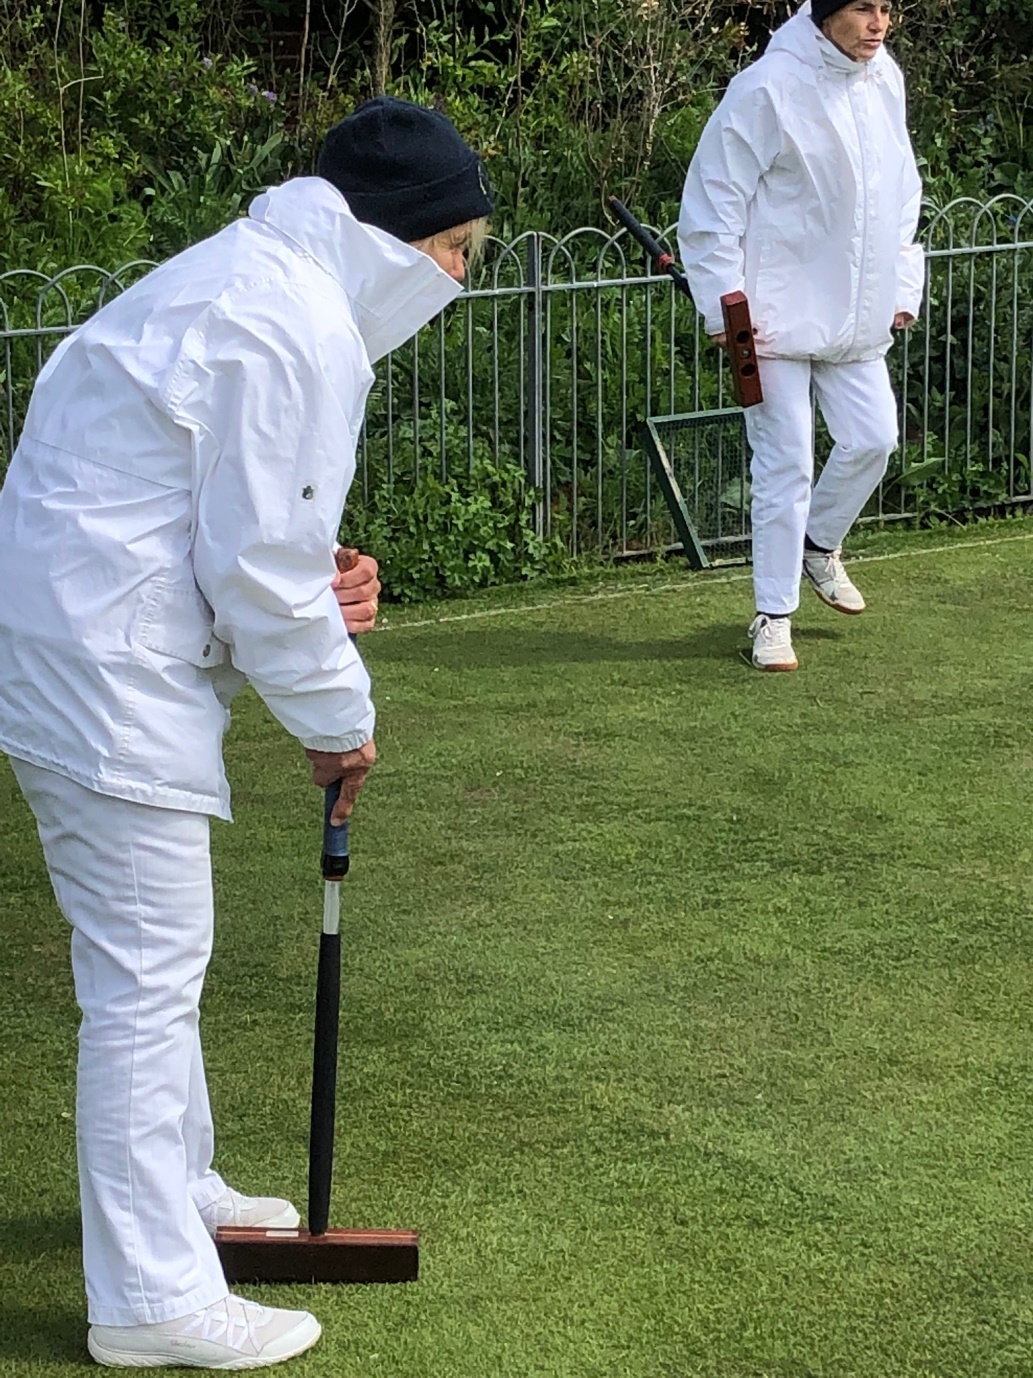 C:\Users\Brian\Documents\My Documents\Dad\Croquet Club\Chairman Newsletter\May 2019\Well Wrapped Up.JPG